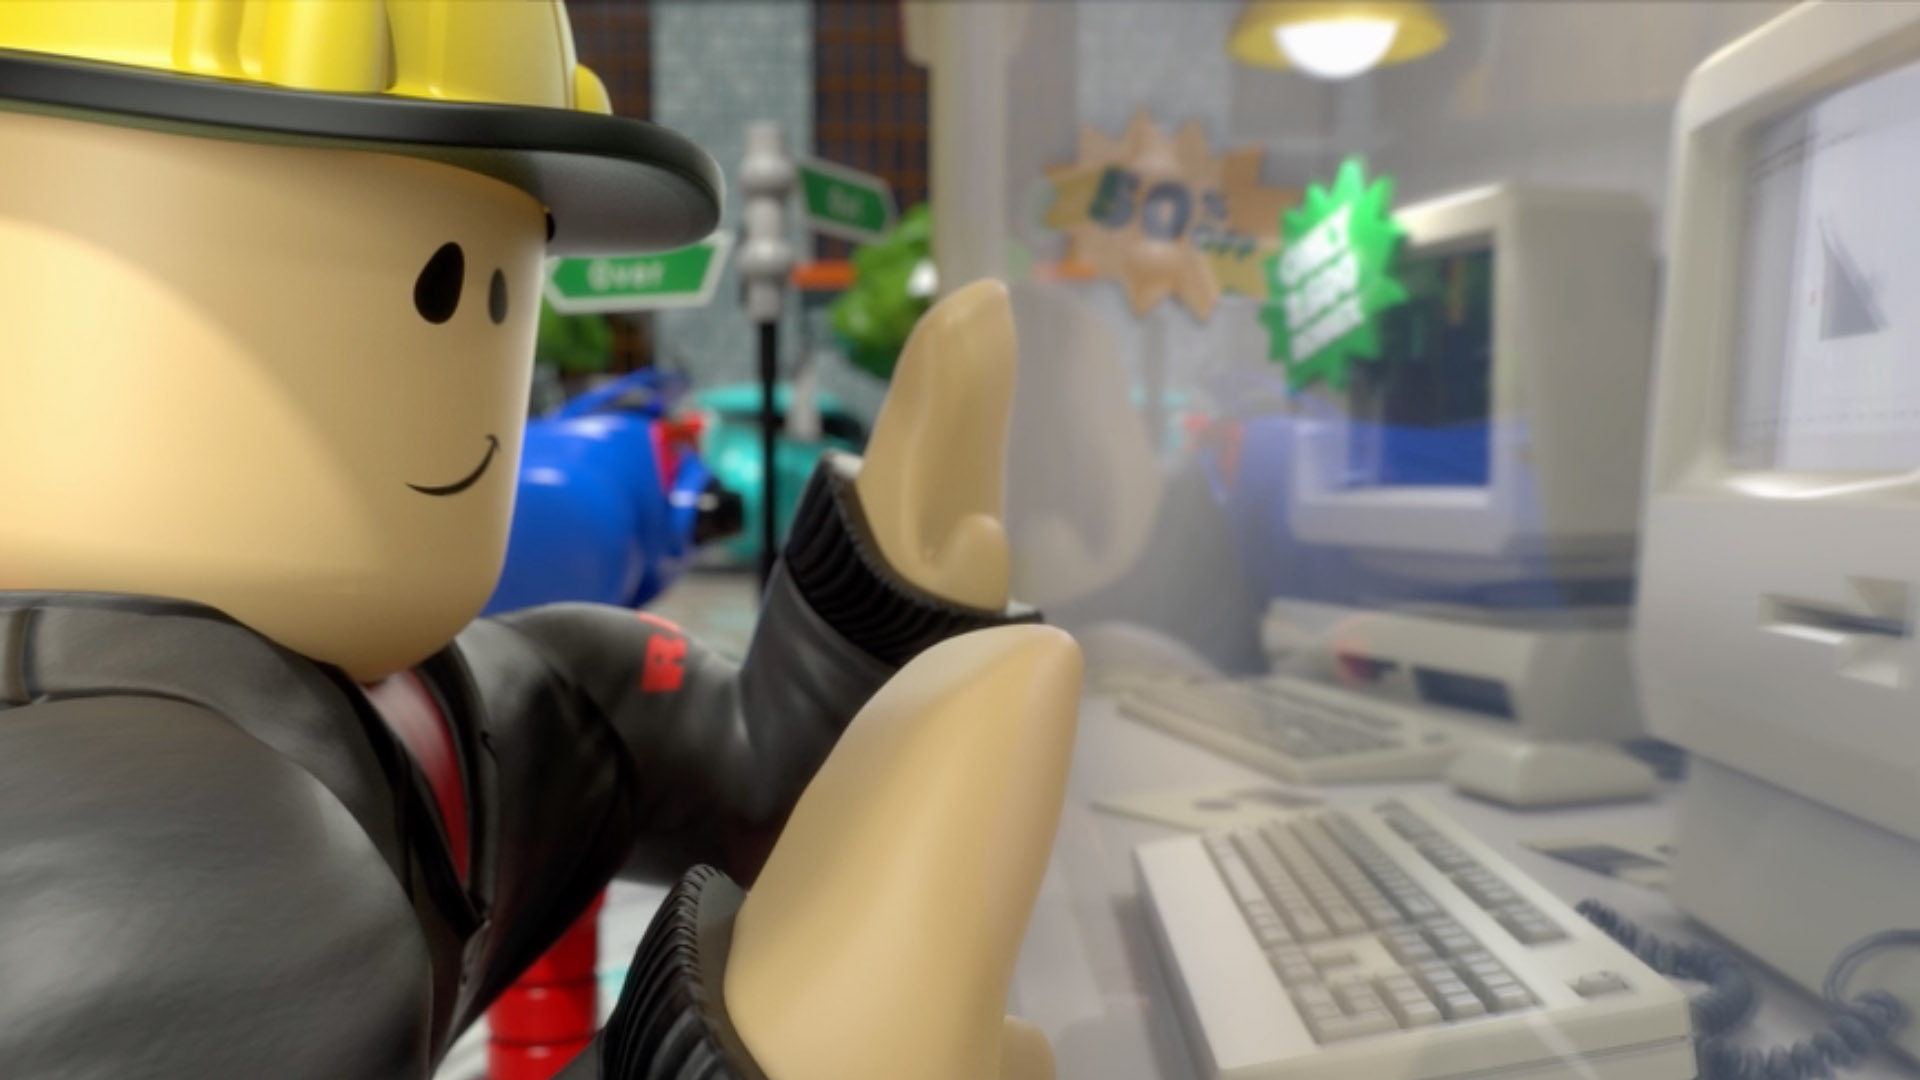 Introducing Our New About Us Video Roblox Blog - roblox corporation founder and ceo david baszucki speaks